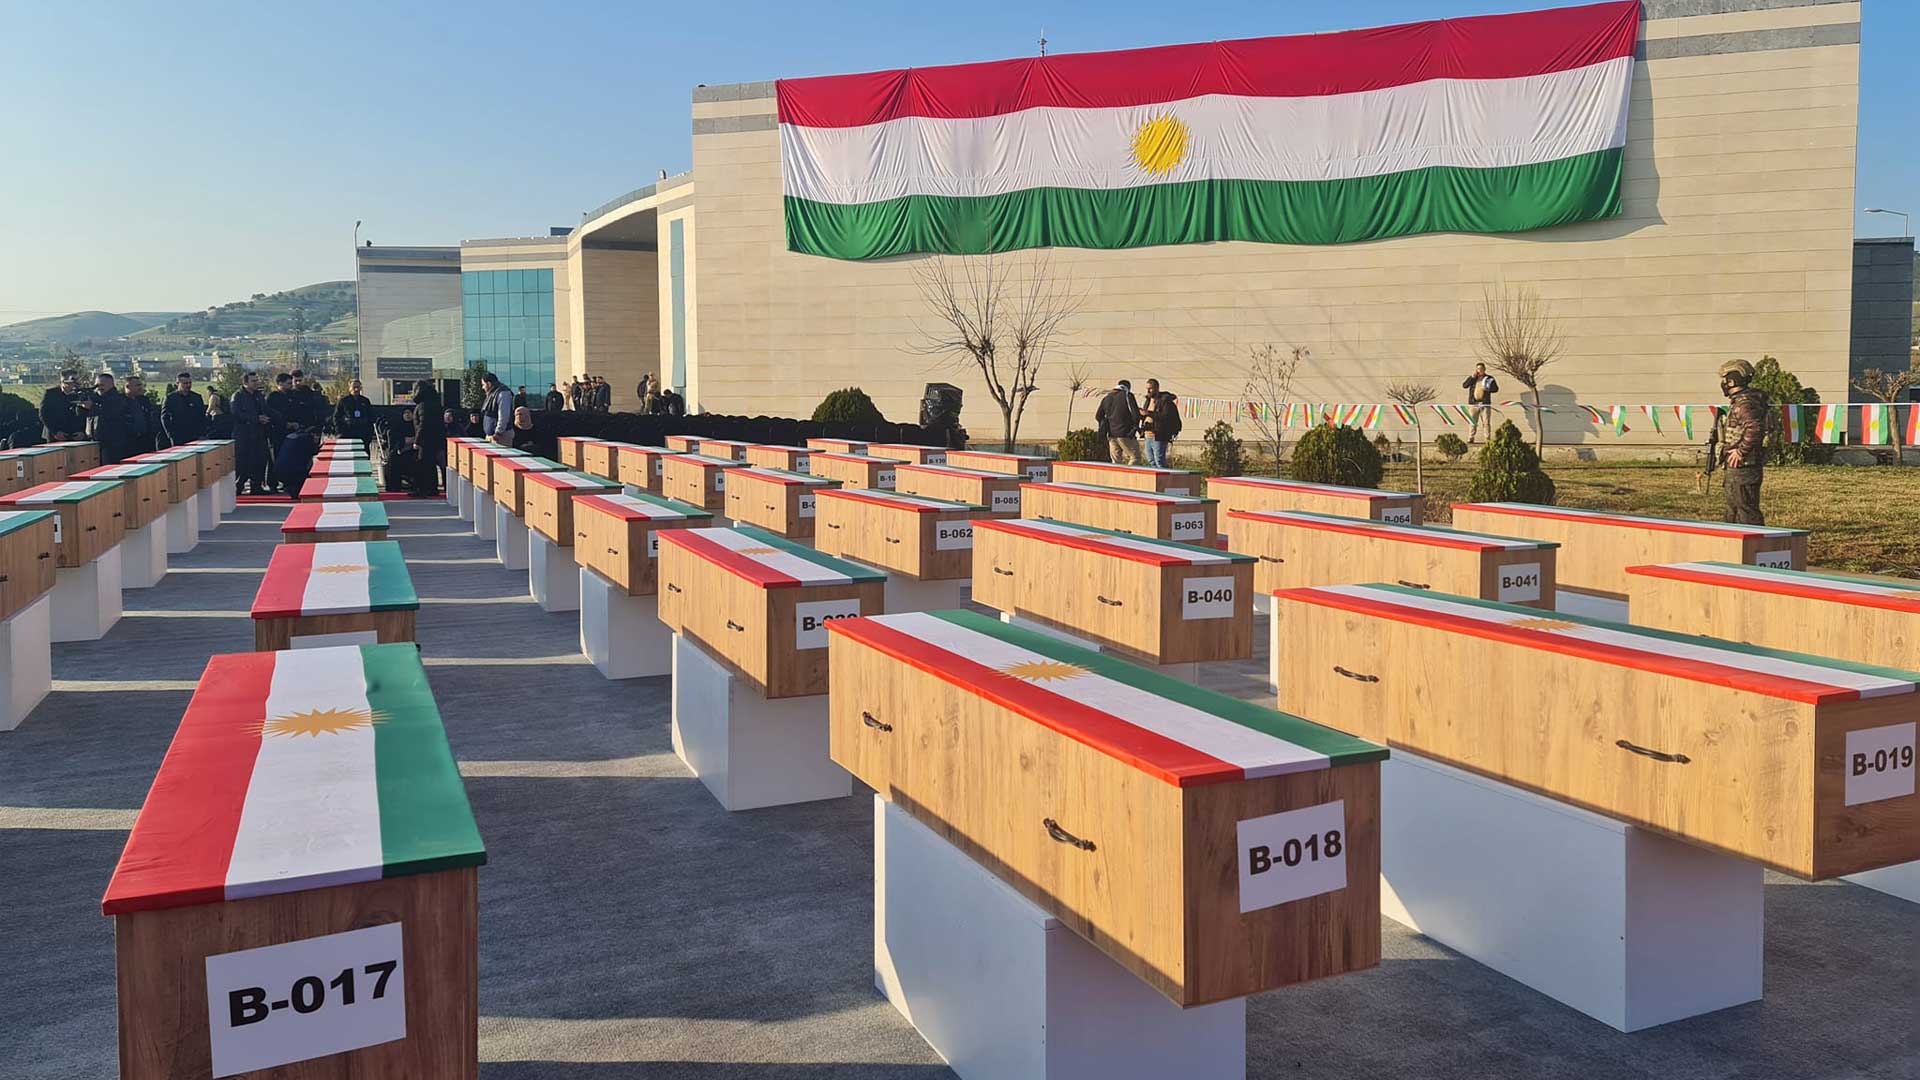 The Remains of 172 Anfal Victims 